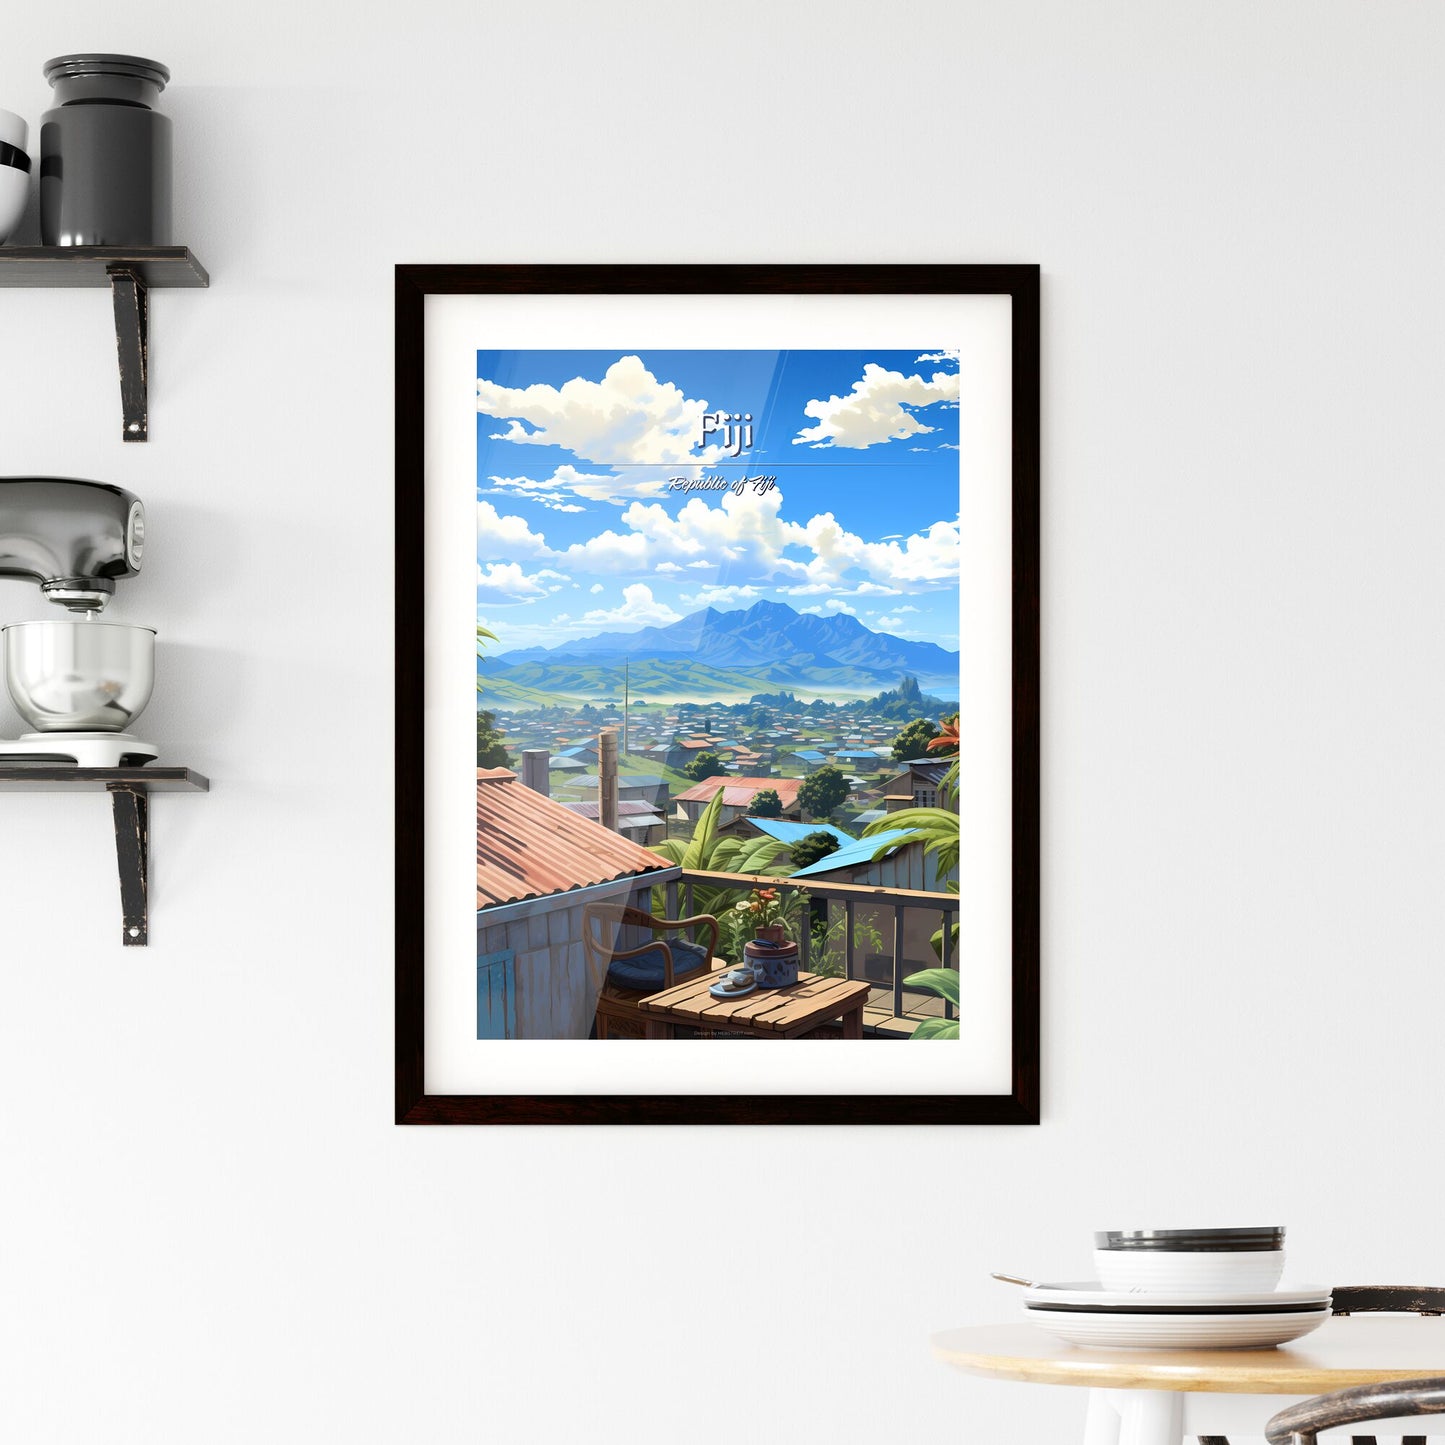 On the roofs of Fiji, Republic of Fiji - Art print of a view of a town from a balcony Default Title